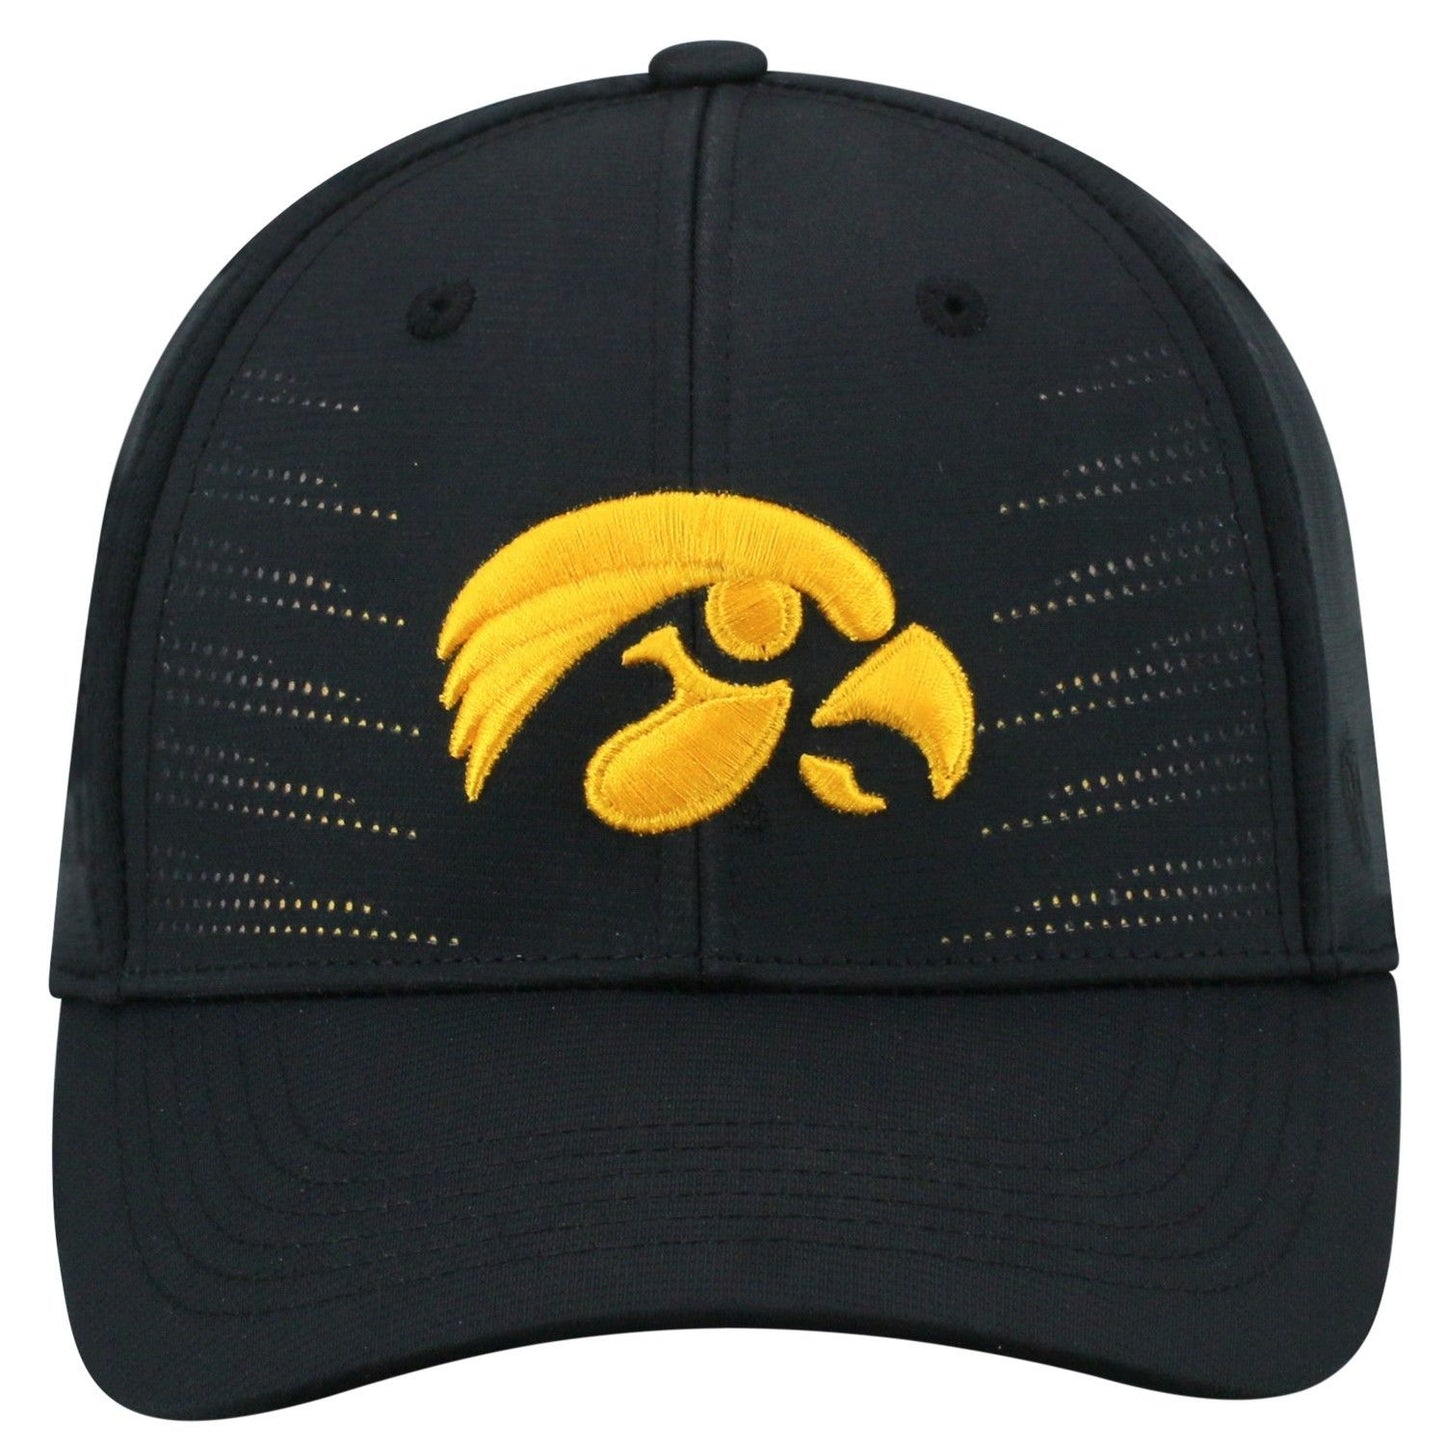 Mens Iowa Hawkeyes Dazed One Fit Flex Fit Hat By Top Of The World